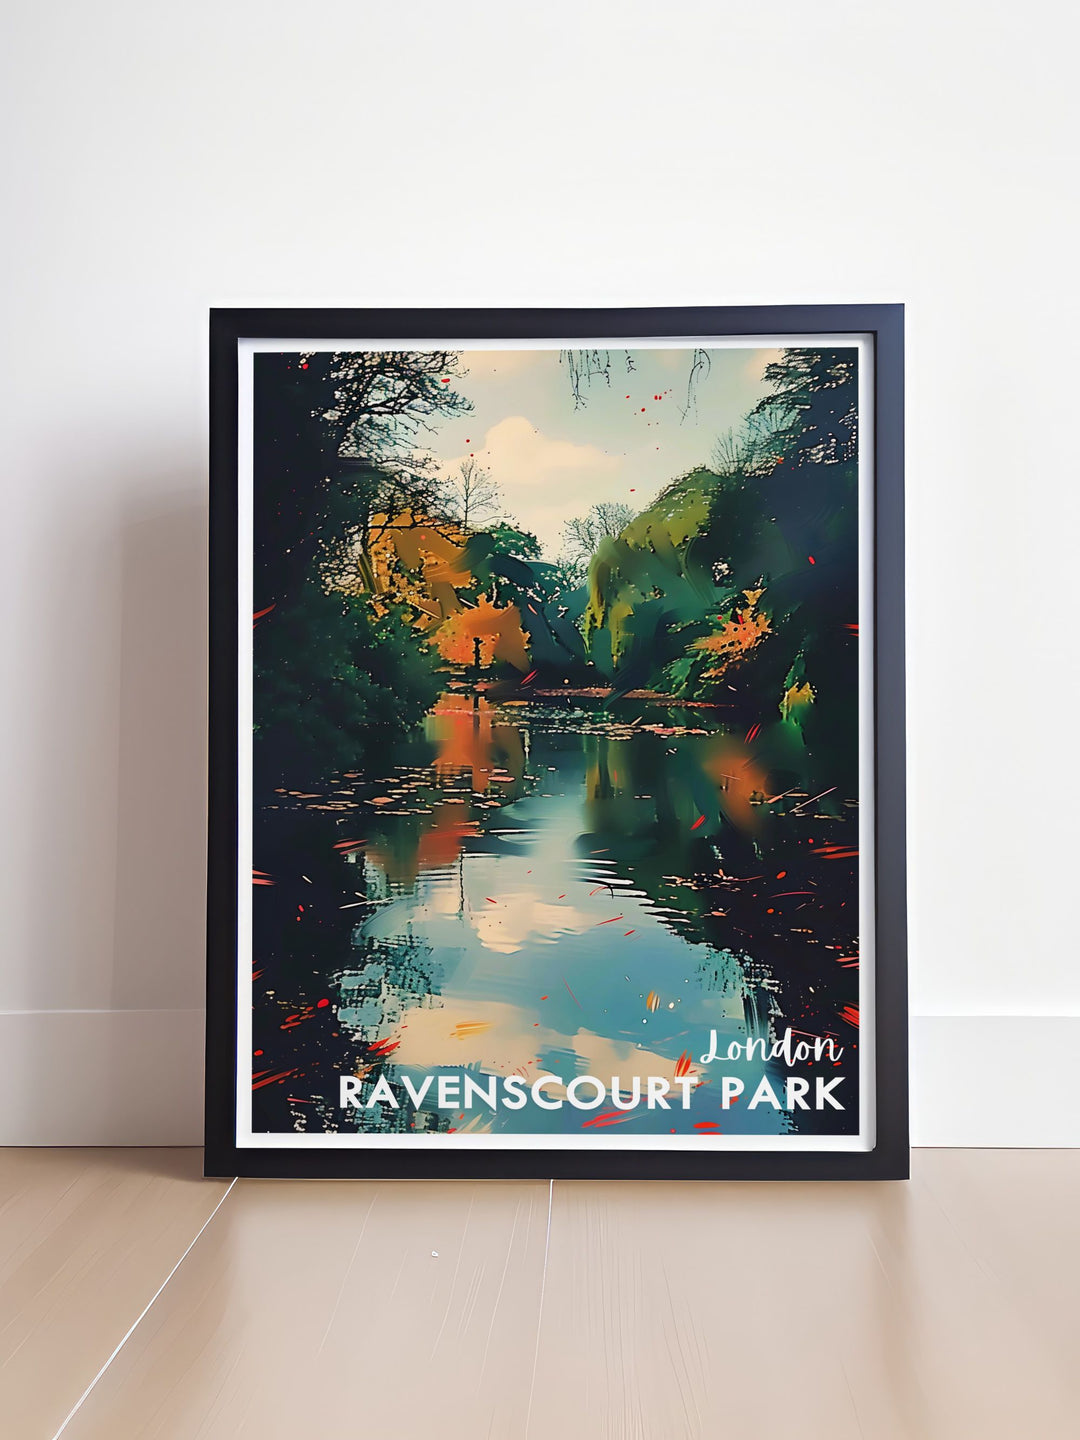 Beautiful Ravenscourt Park Lake Poster capturing the serene ambiance of the parks lake. Perfect for travel enthusiasts, this vintage travel print adds a peaceful and historic charm to any space, showcasing one of Londons most cherished green spaces.